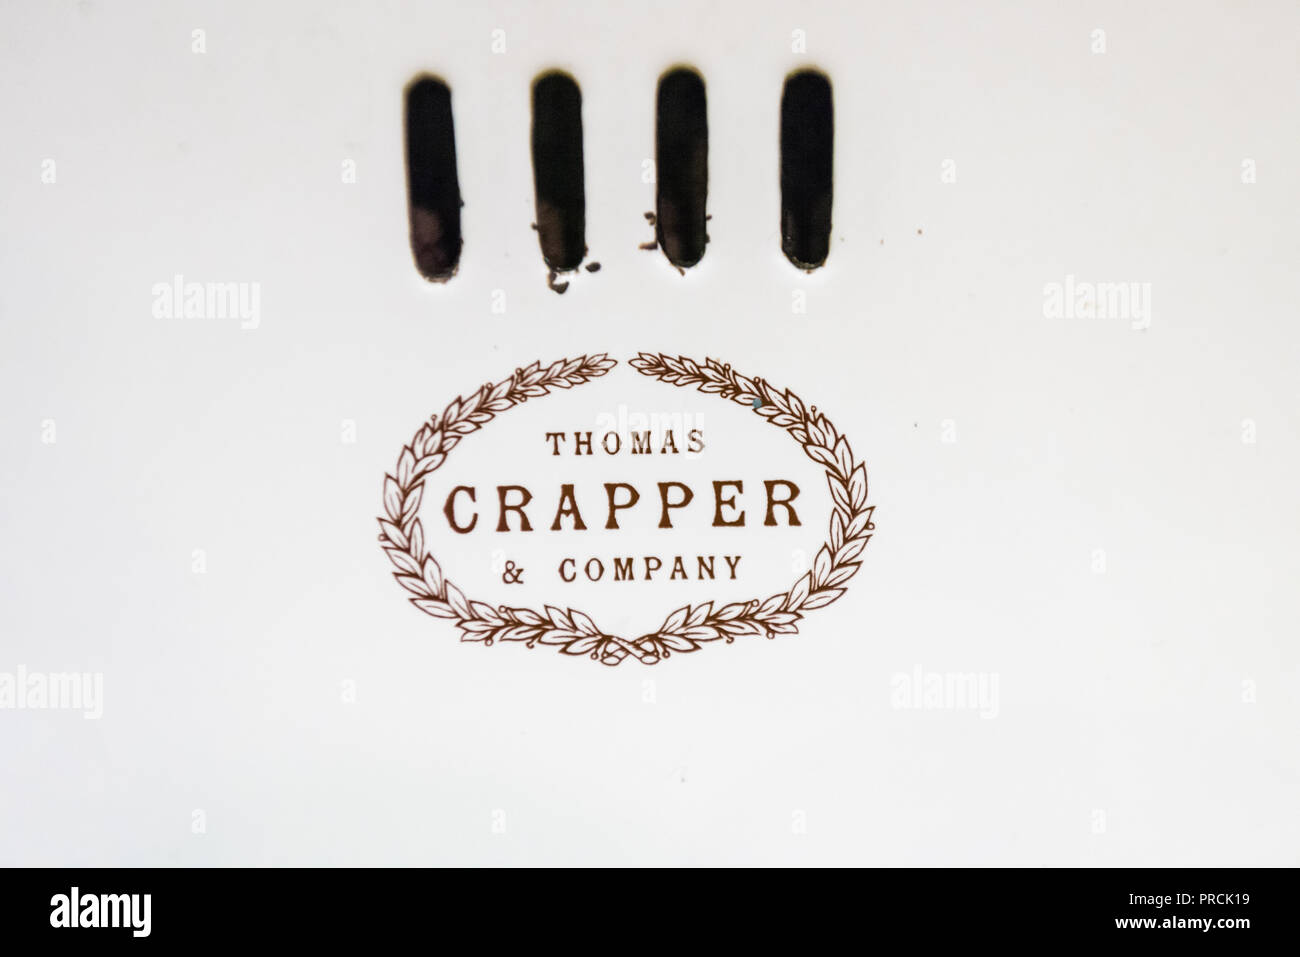 Logo on an old fashioned bathroom sink and taps made by Thomas Crapper and Company Stock Photo